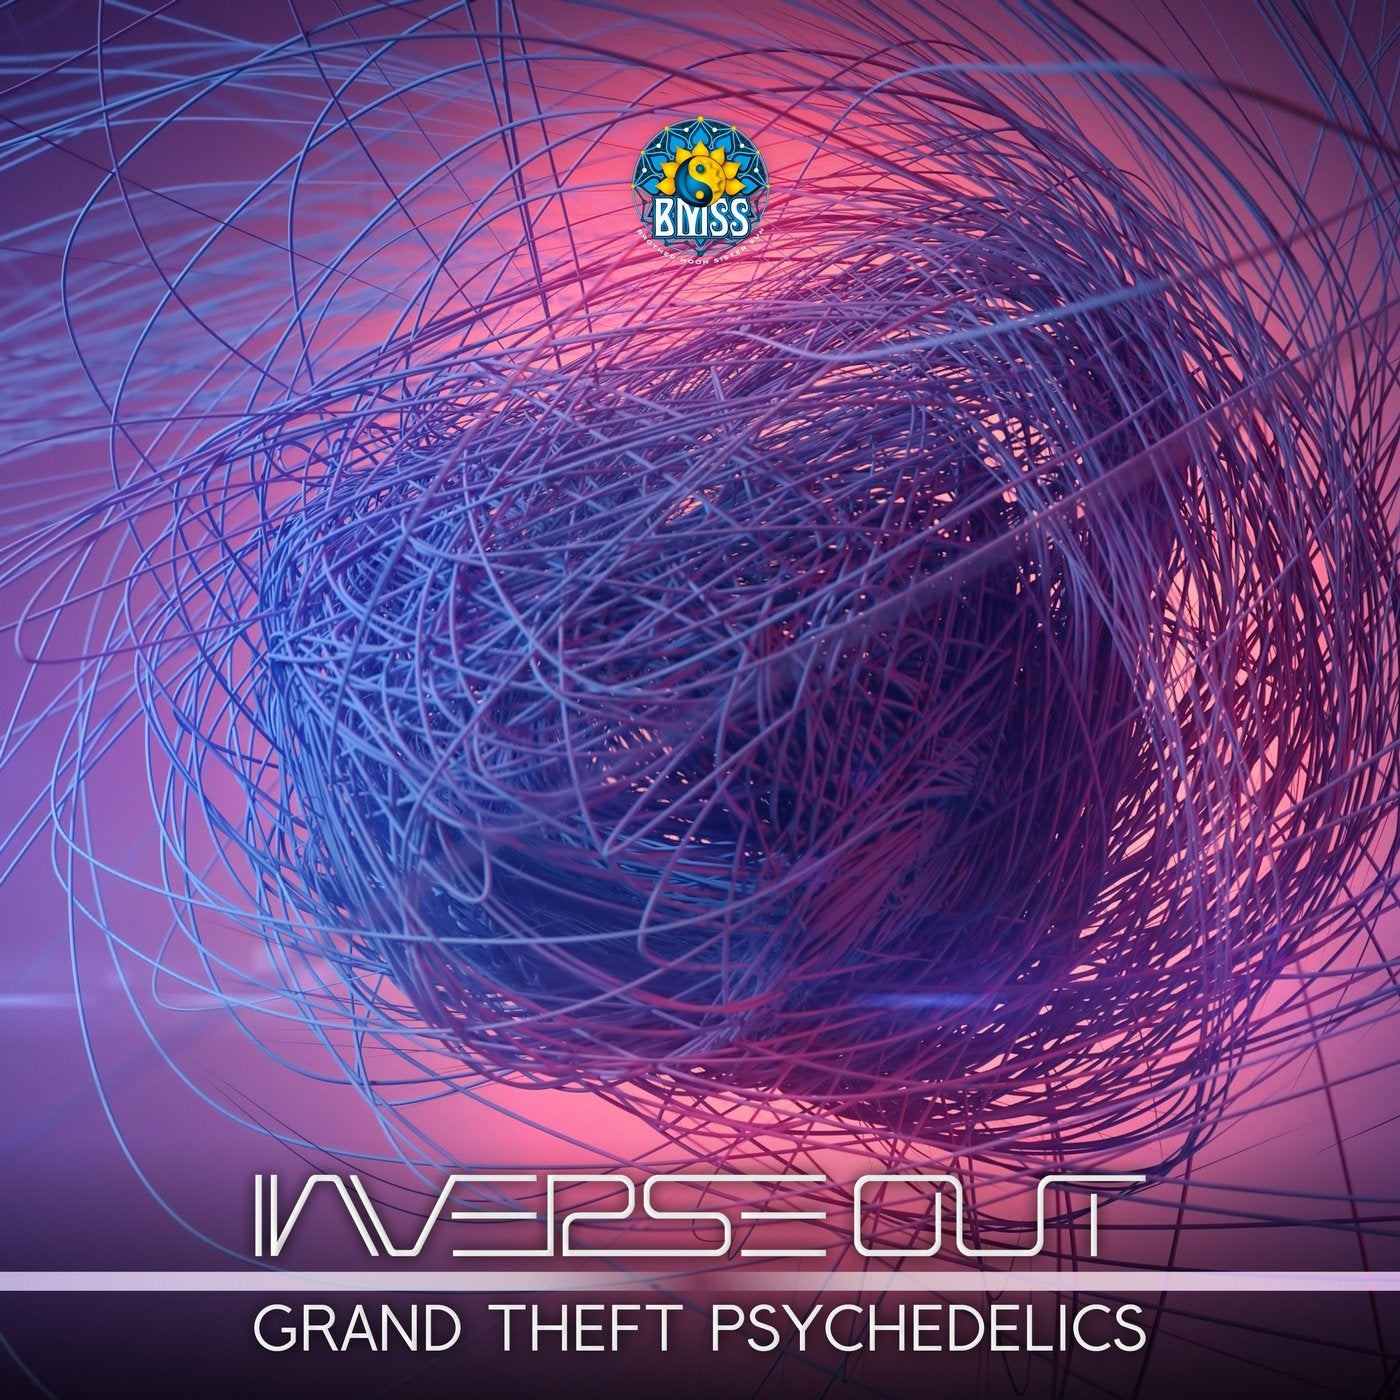 Grand Theft Psychedelics